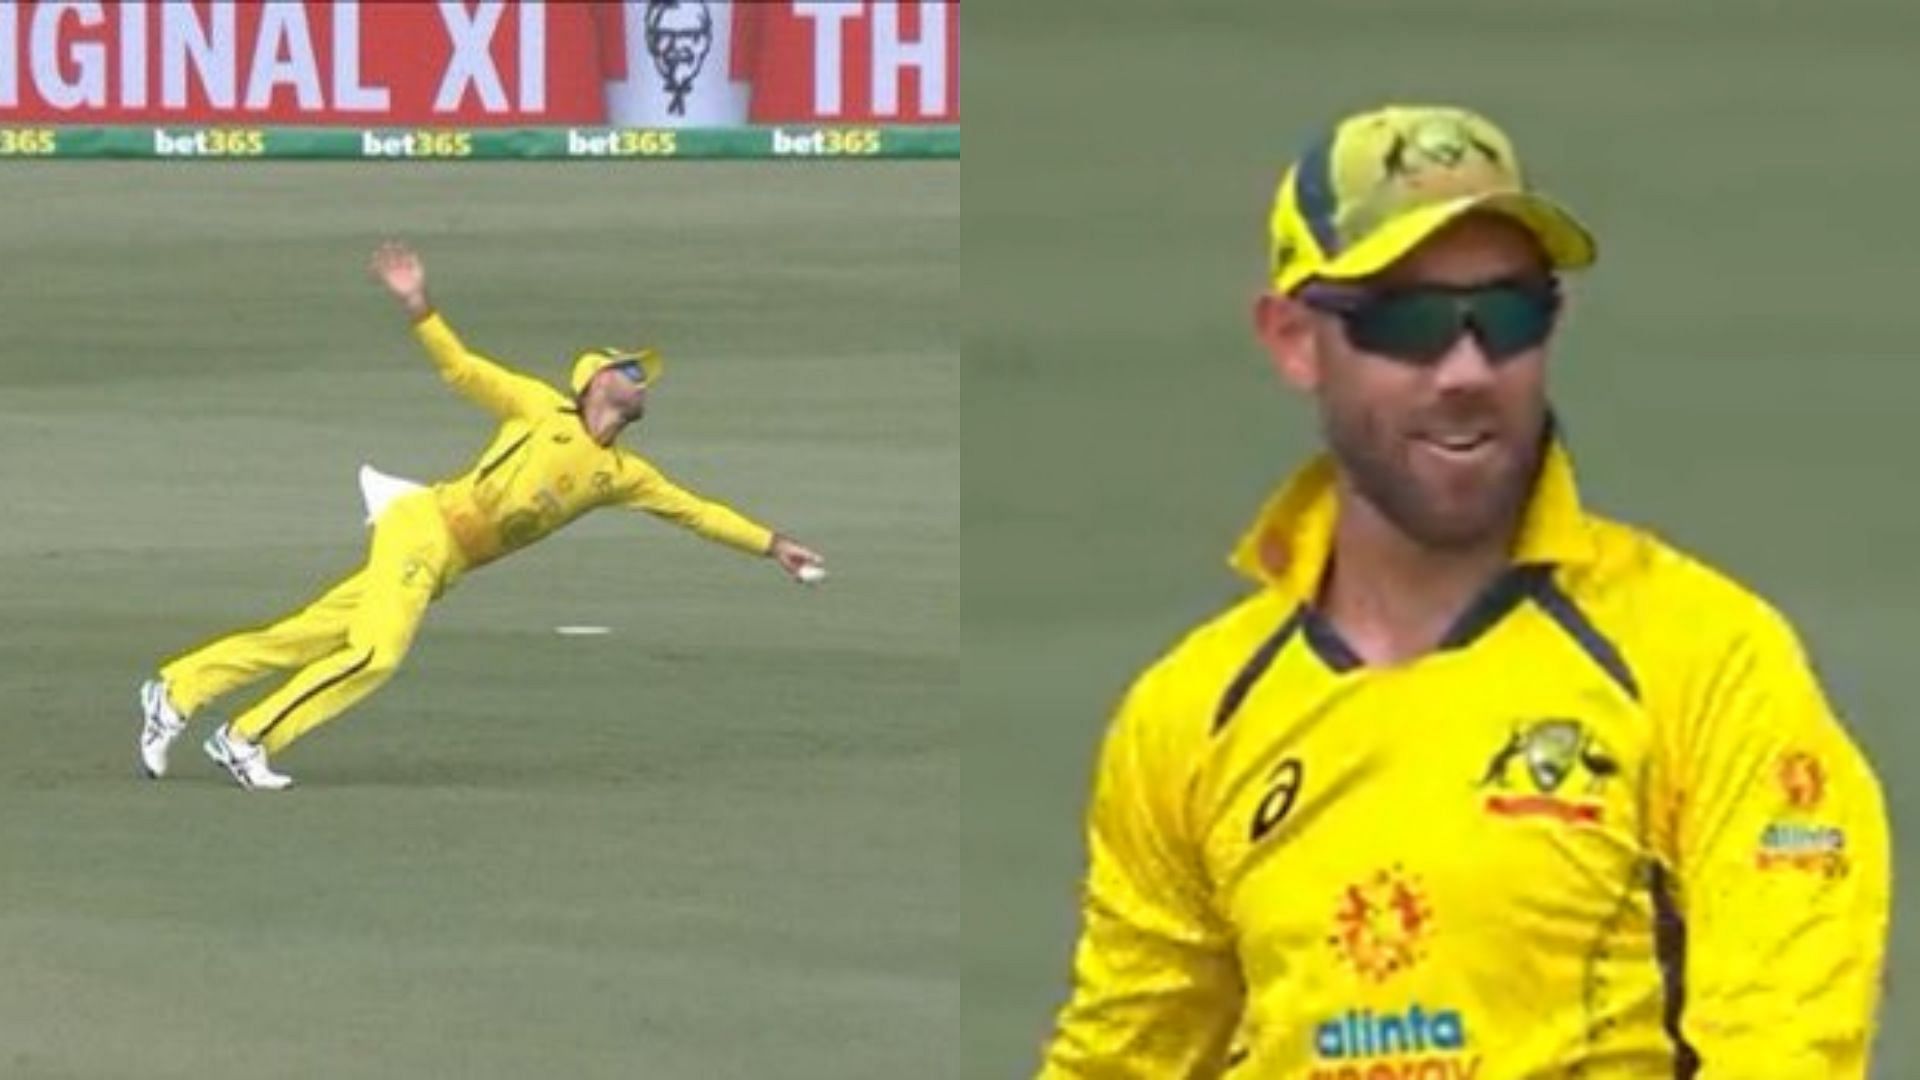 [Watch] Glenn Maxwell takes a stunning one-handed catch to dismiss Martin Guptill in first ODI against New Zealand 